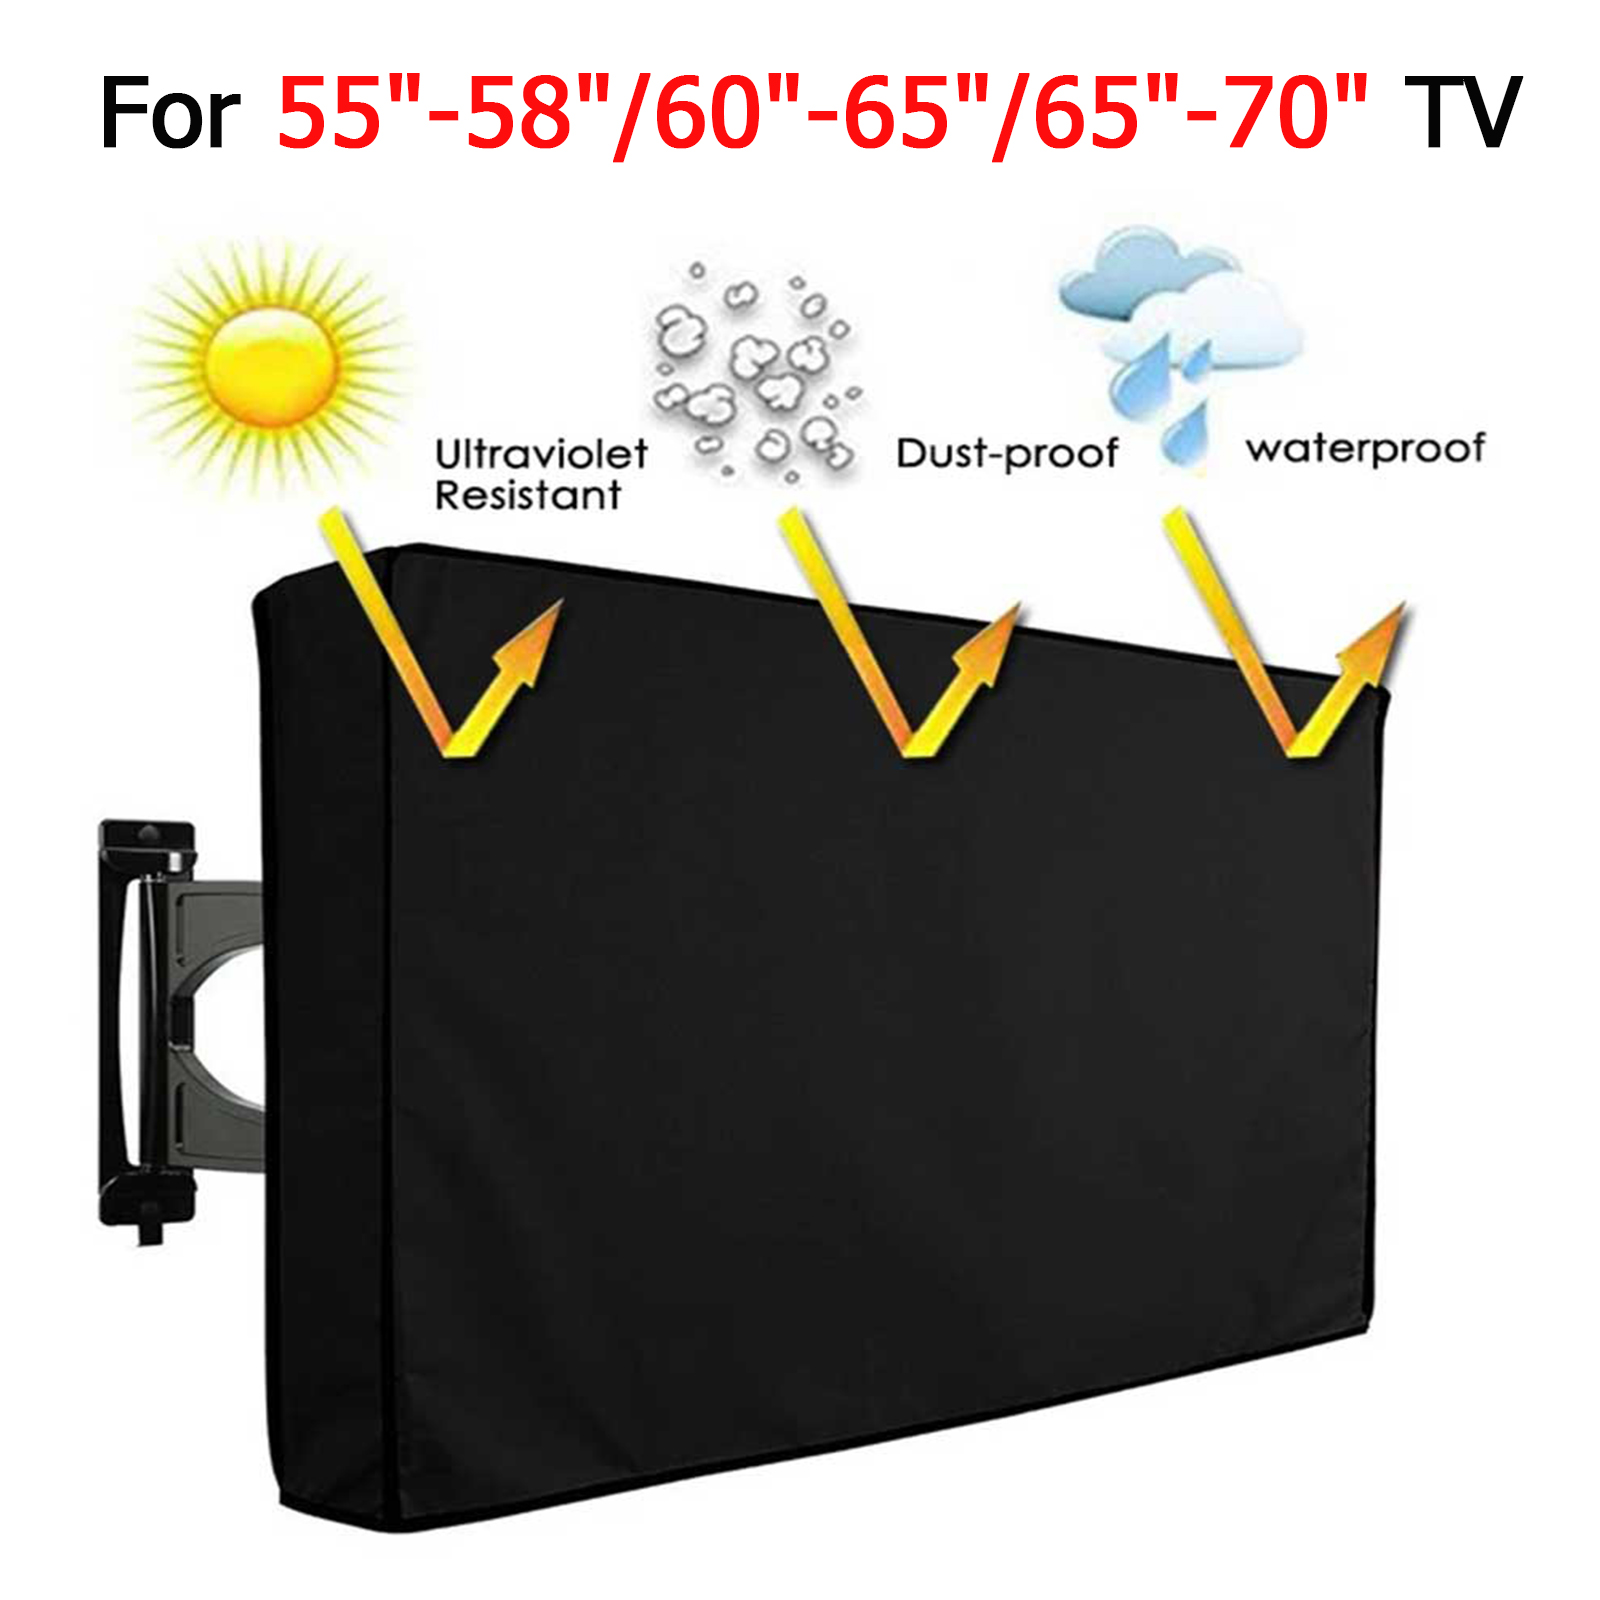 Outdoor Waterproof TV Cover Black Television Protector For 60-65 inch TV 37*58*5in